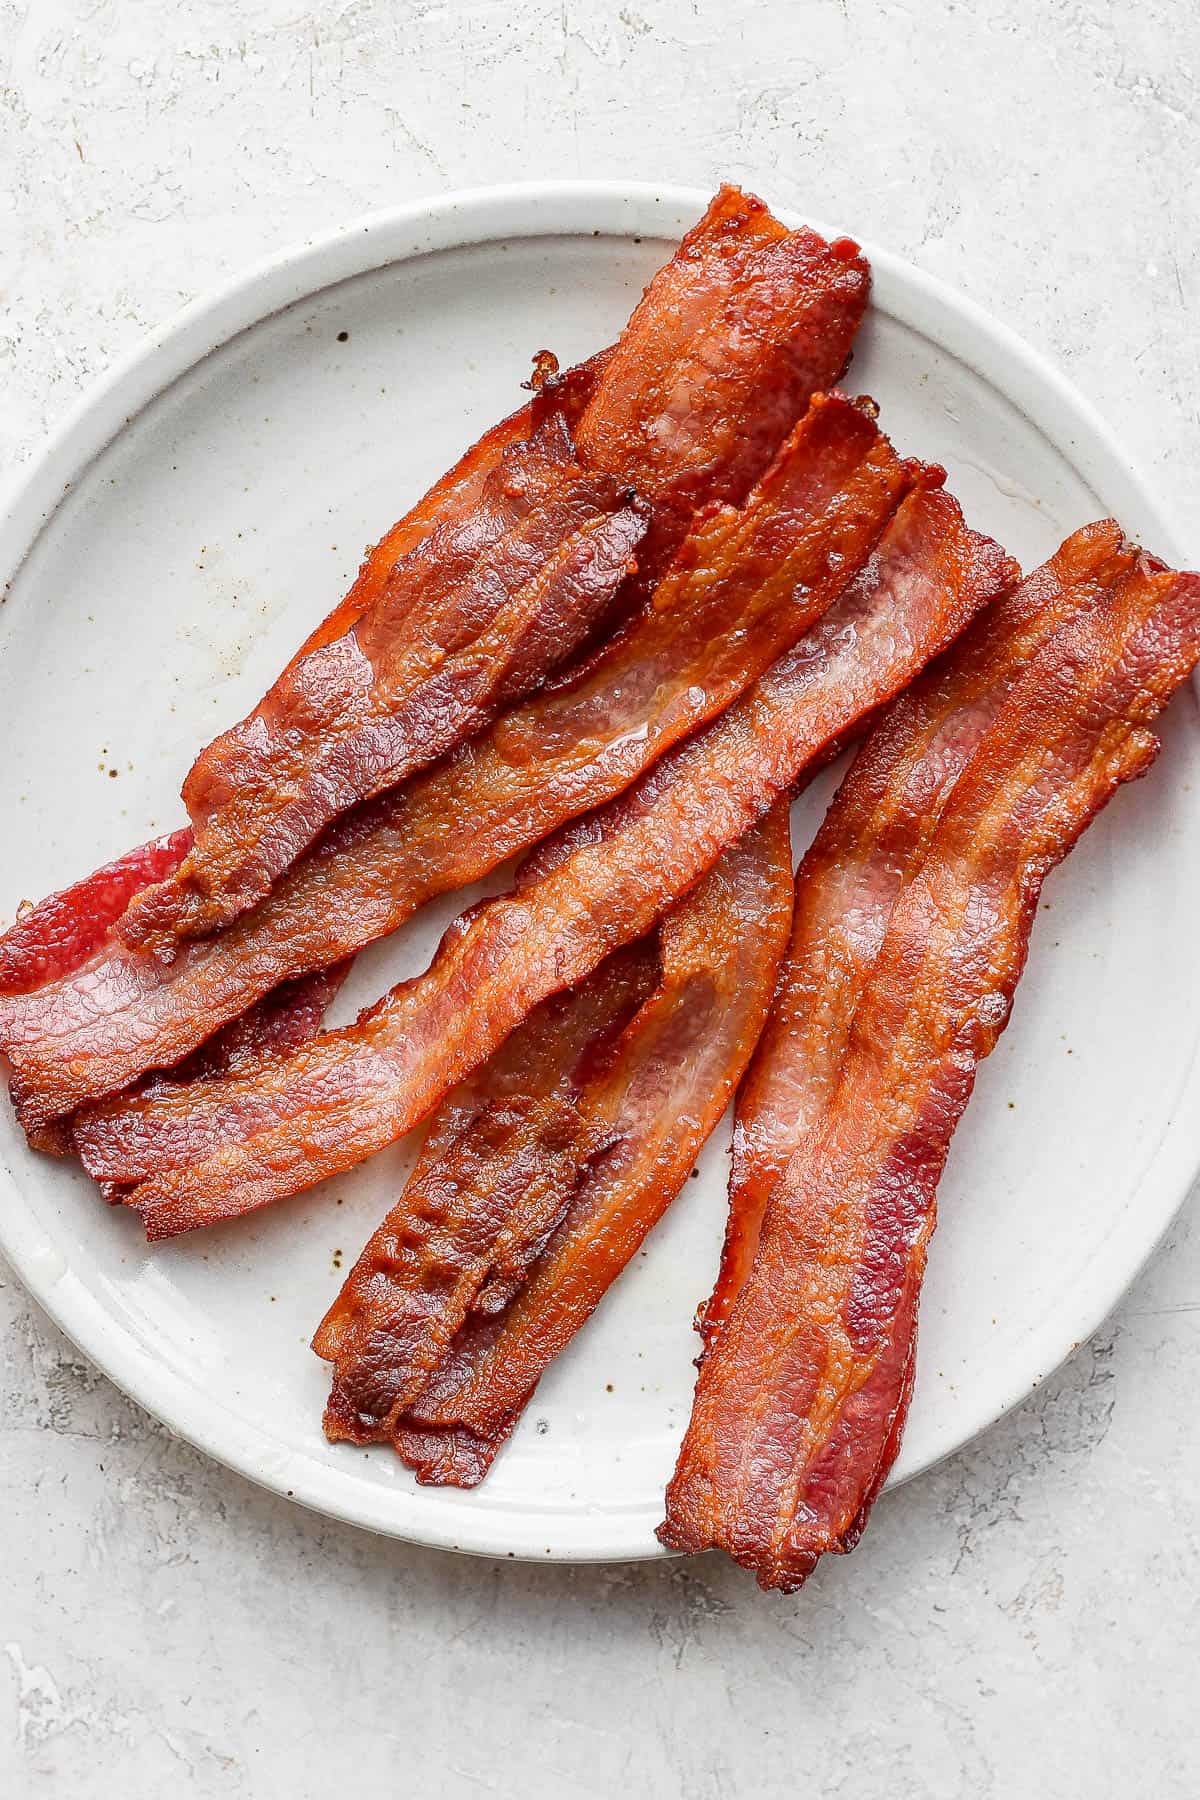 A plate of bacon after being baked in the oven.